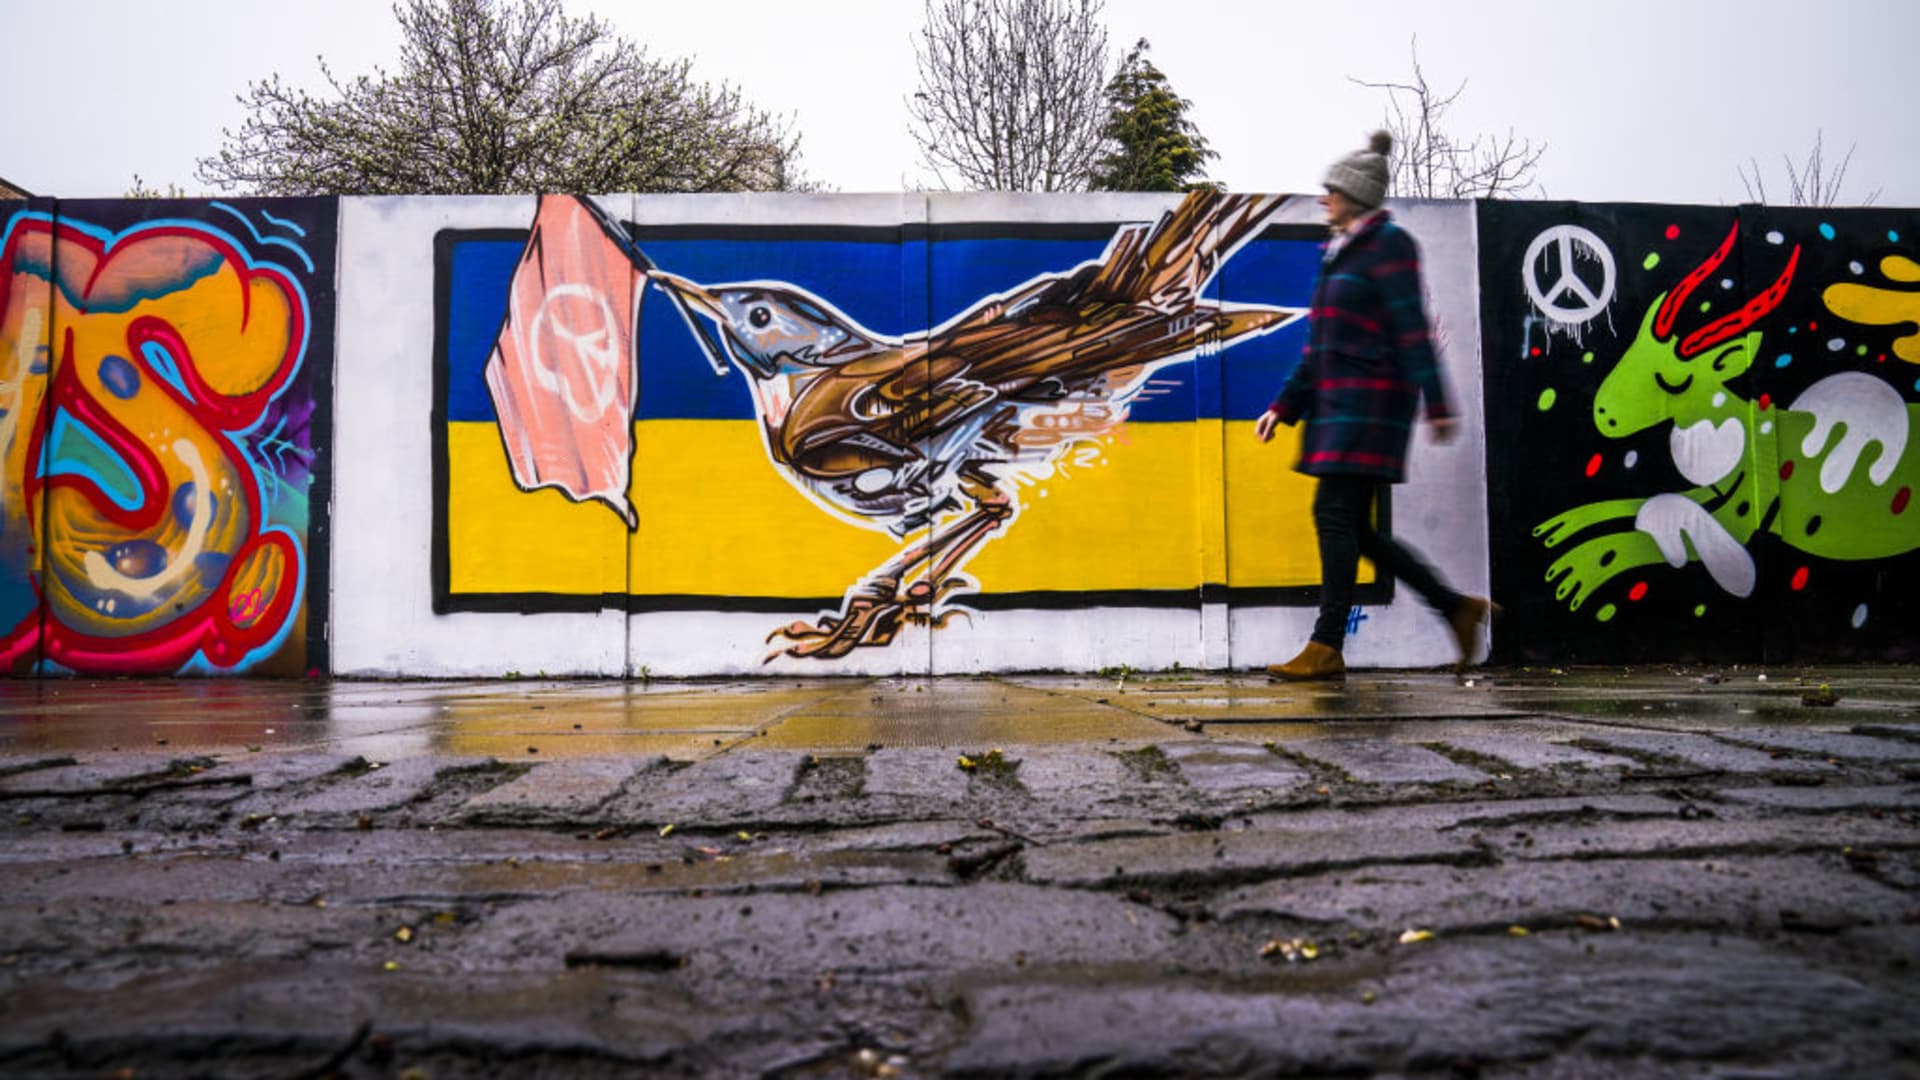 New street art which has appeared in Leith, Edinburgh, in response to Russia's invasion of Ukraine. The mural features a Nightingale, the official national bird of Ukraine, against the country's flag. Picture date: Tuesday April 5, 2022.